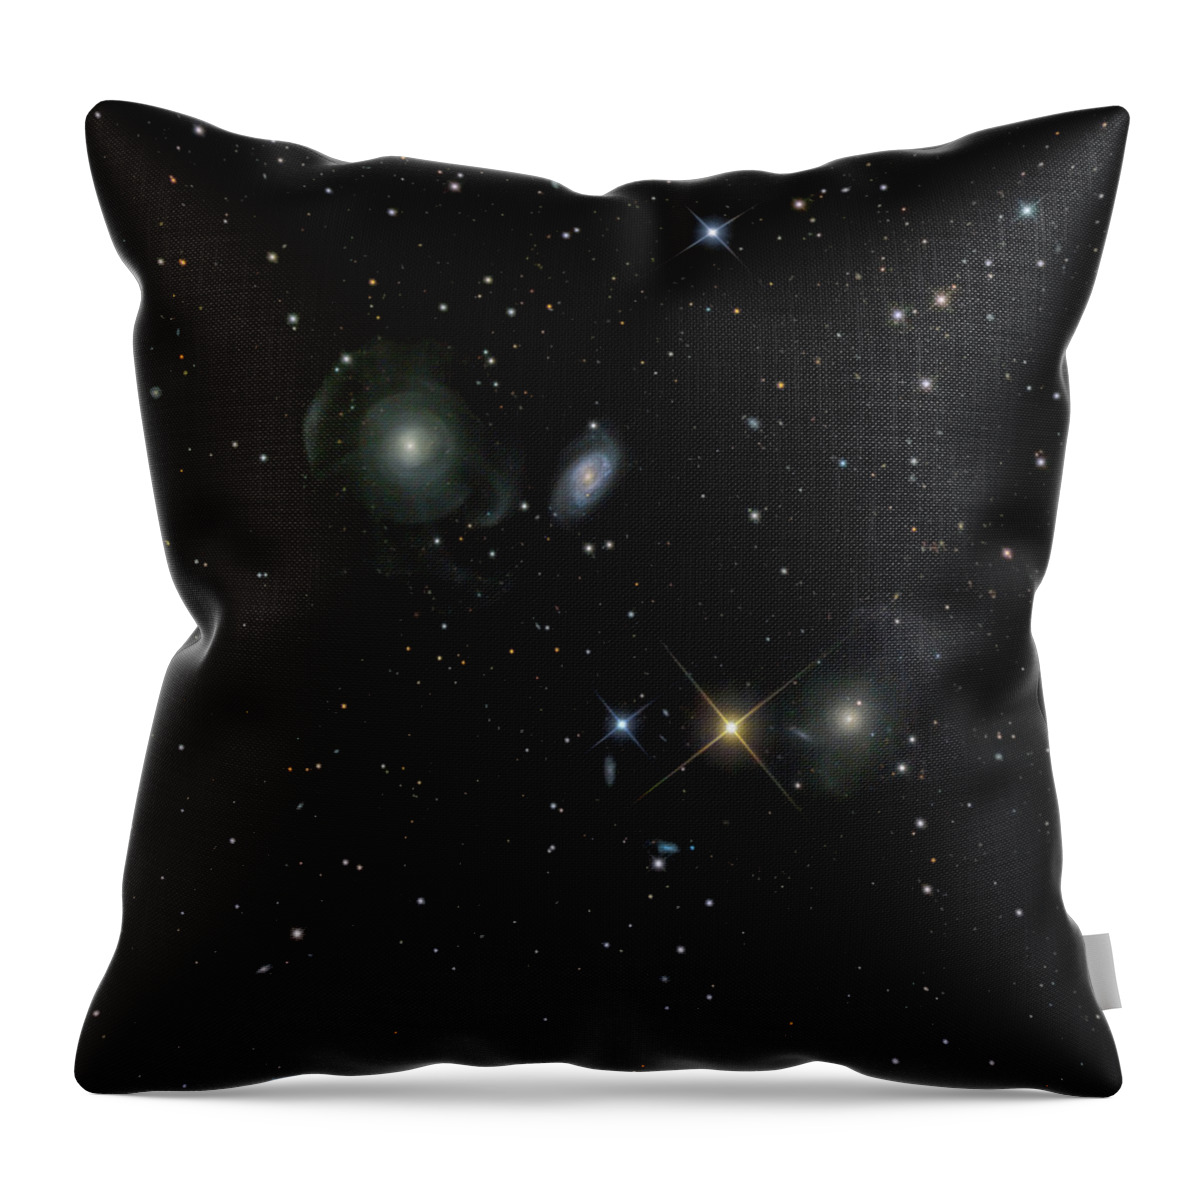 New Mexico Throw Pillow featuring the photograph Shell Galaxies by Image By Marco Lorenzi, Www.glitteringlights.com